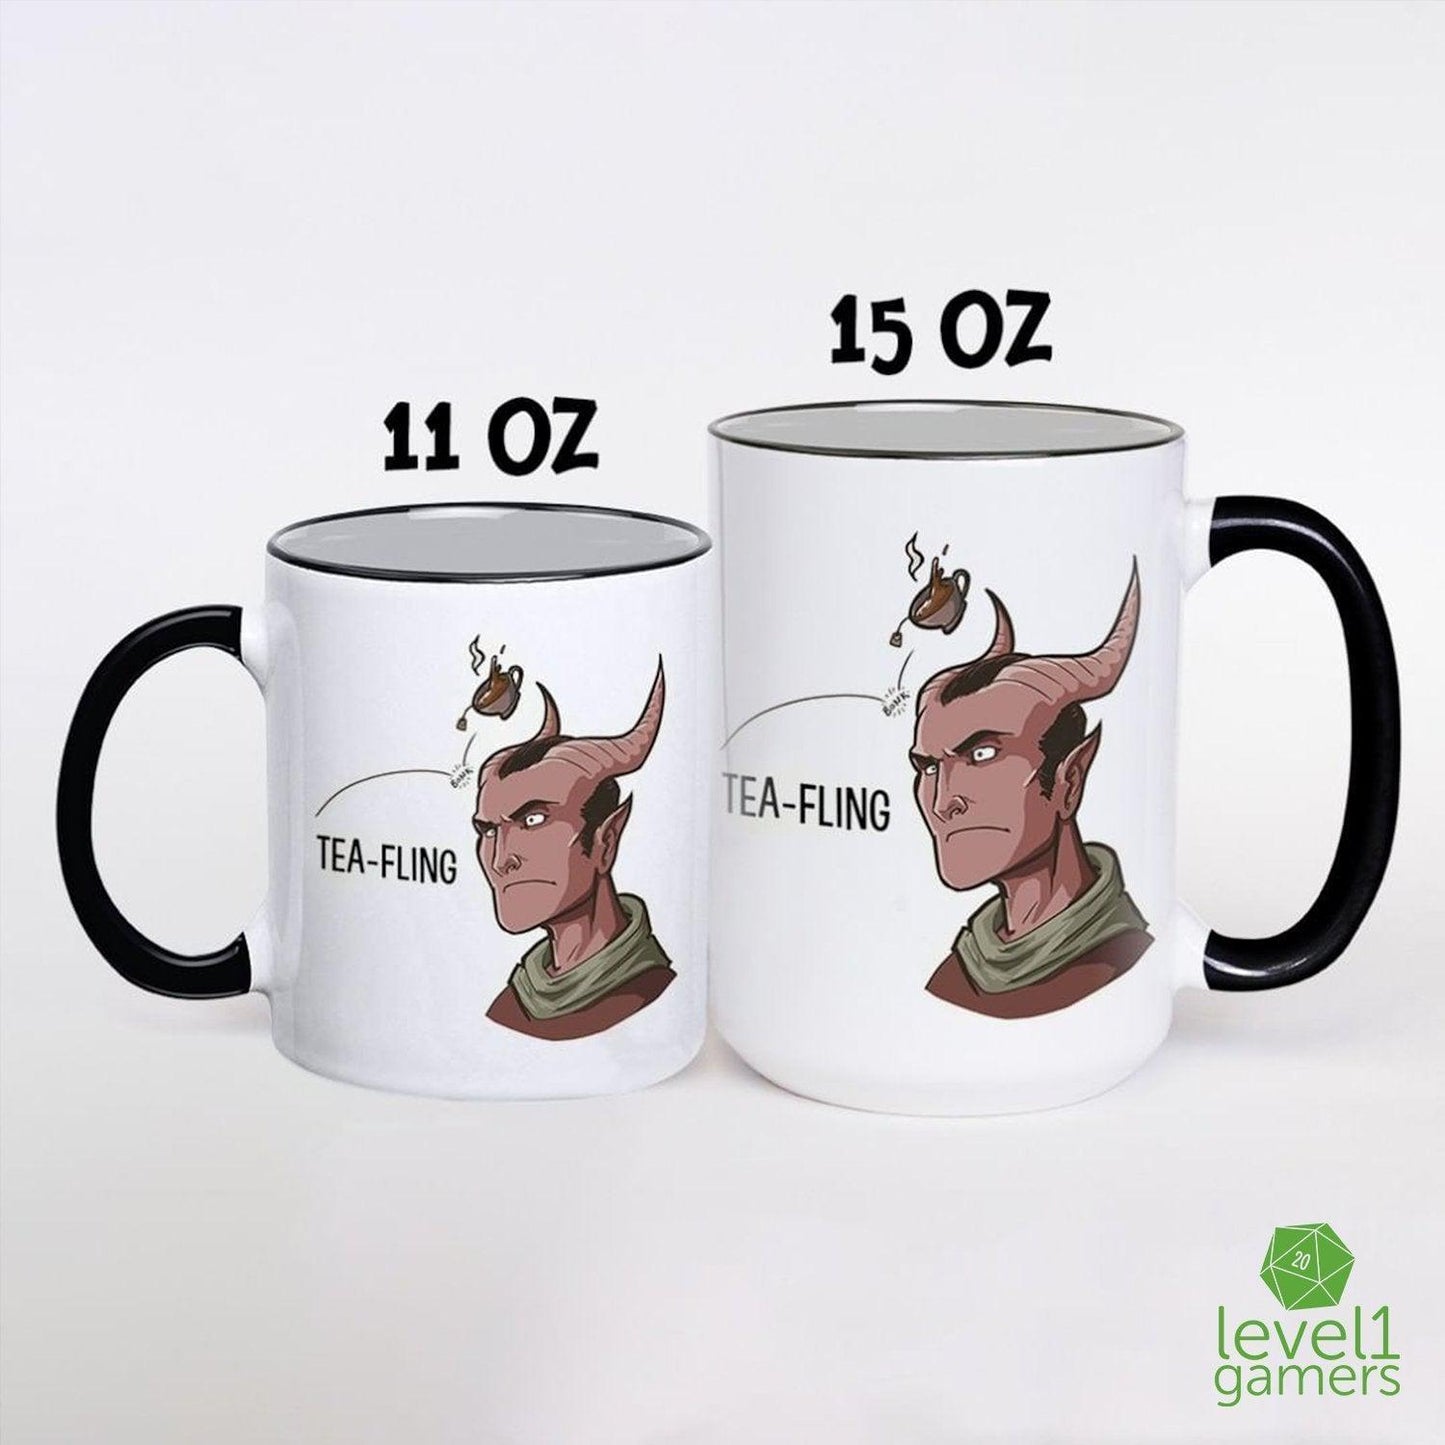 Magician's Menagerie Exclusive Mug  Level 1 Gamers   